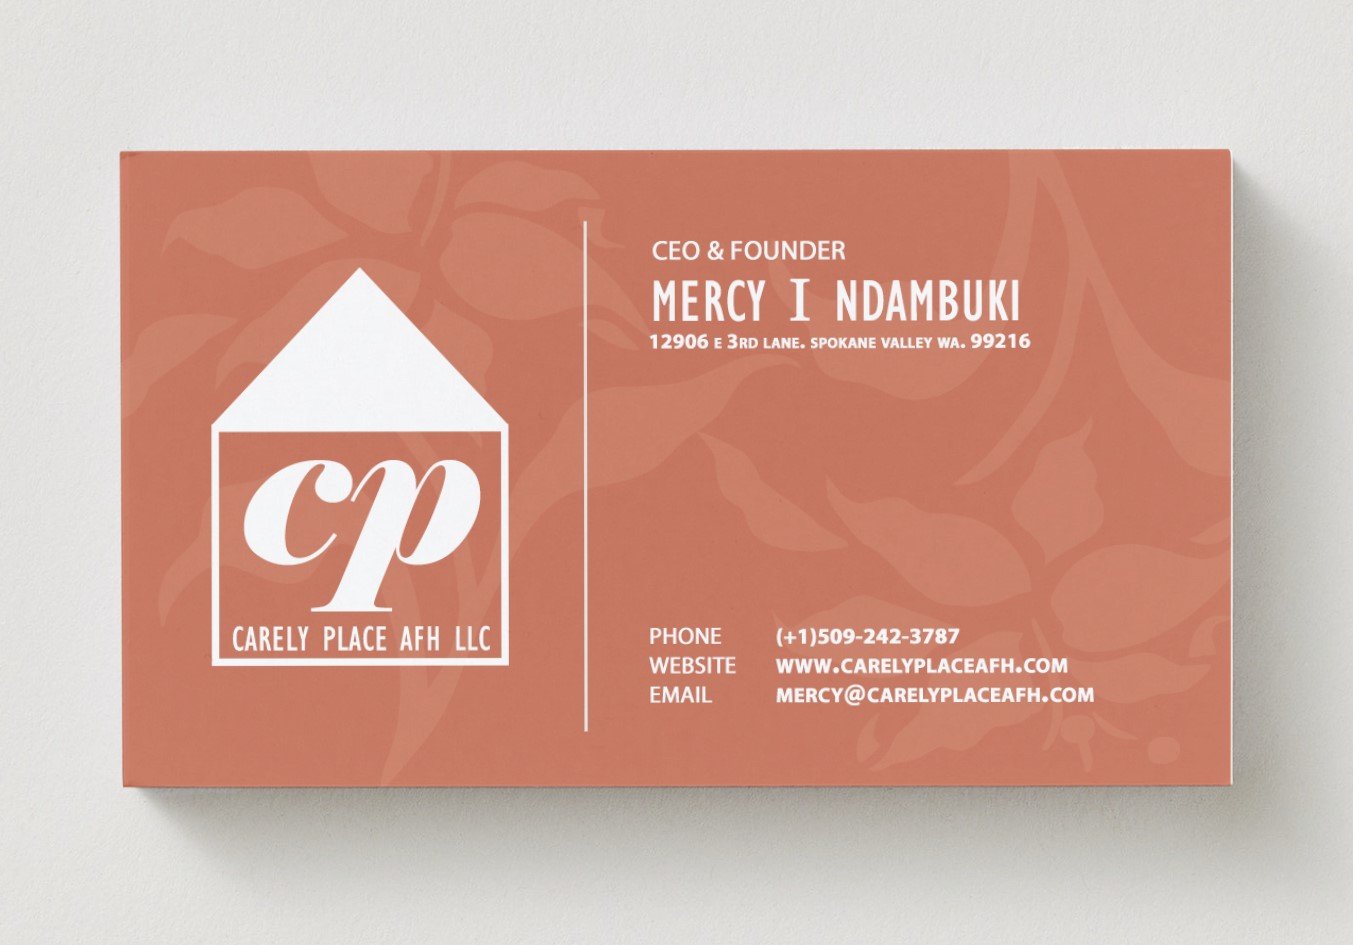 21051401 - Carely Place AFH - Business Cards  - Back.jpg